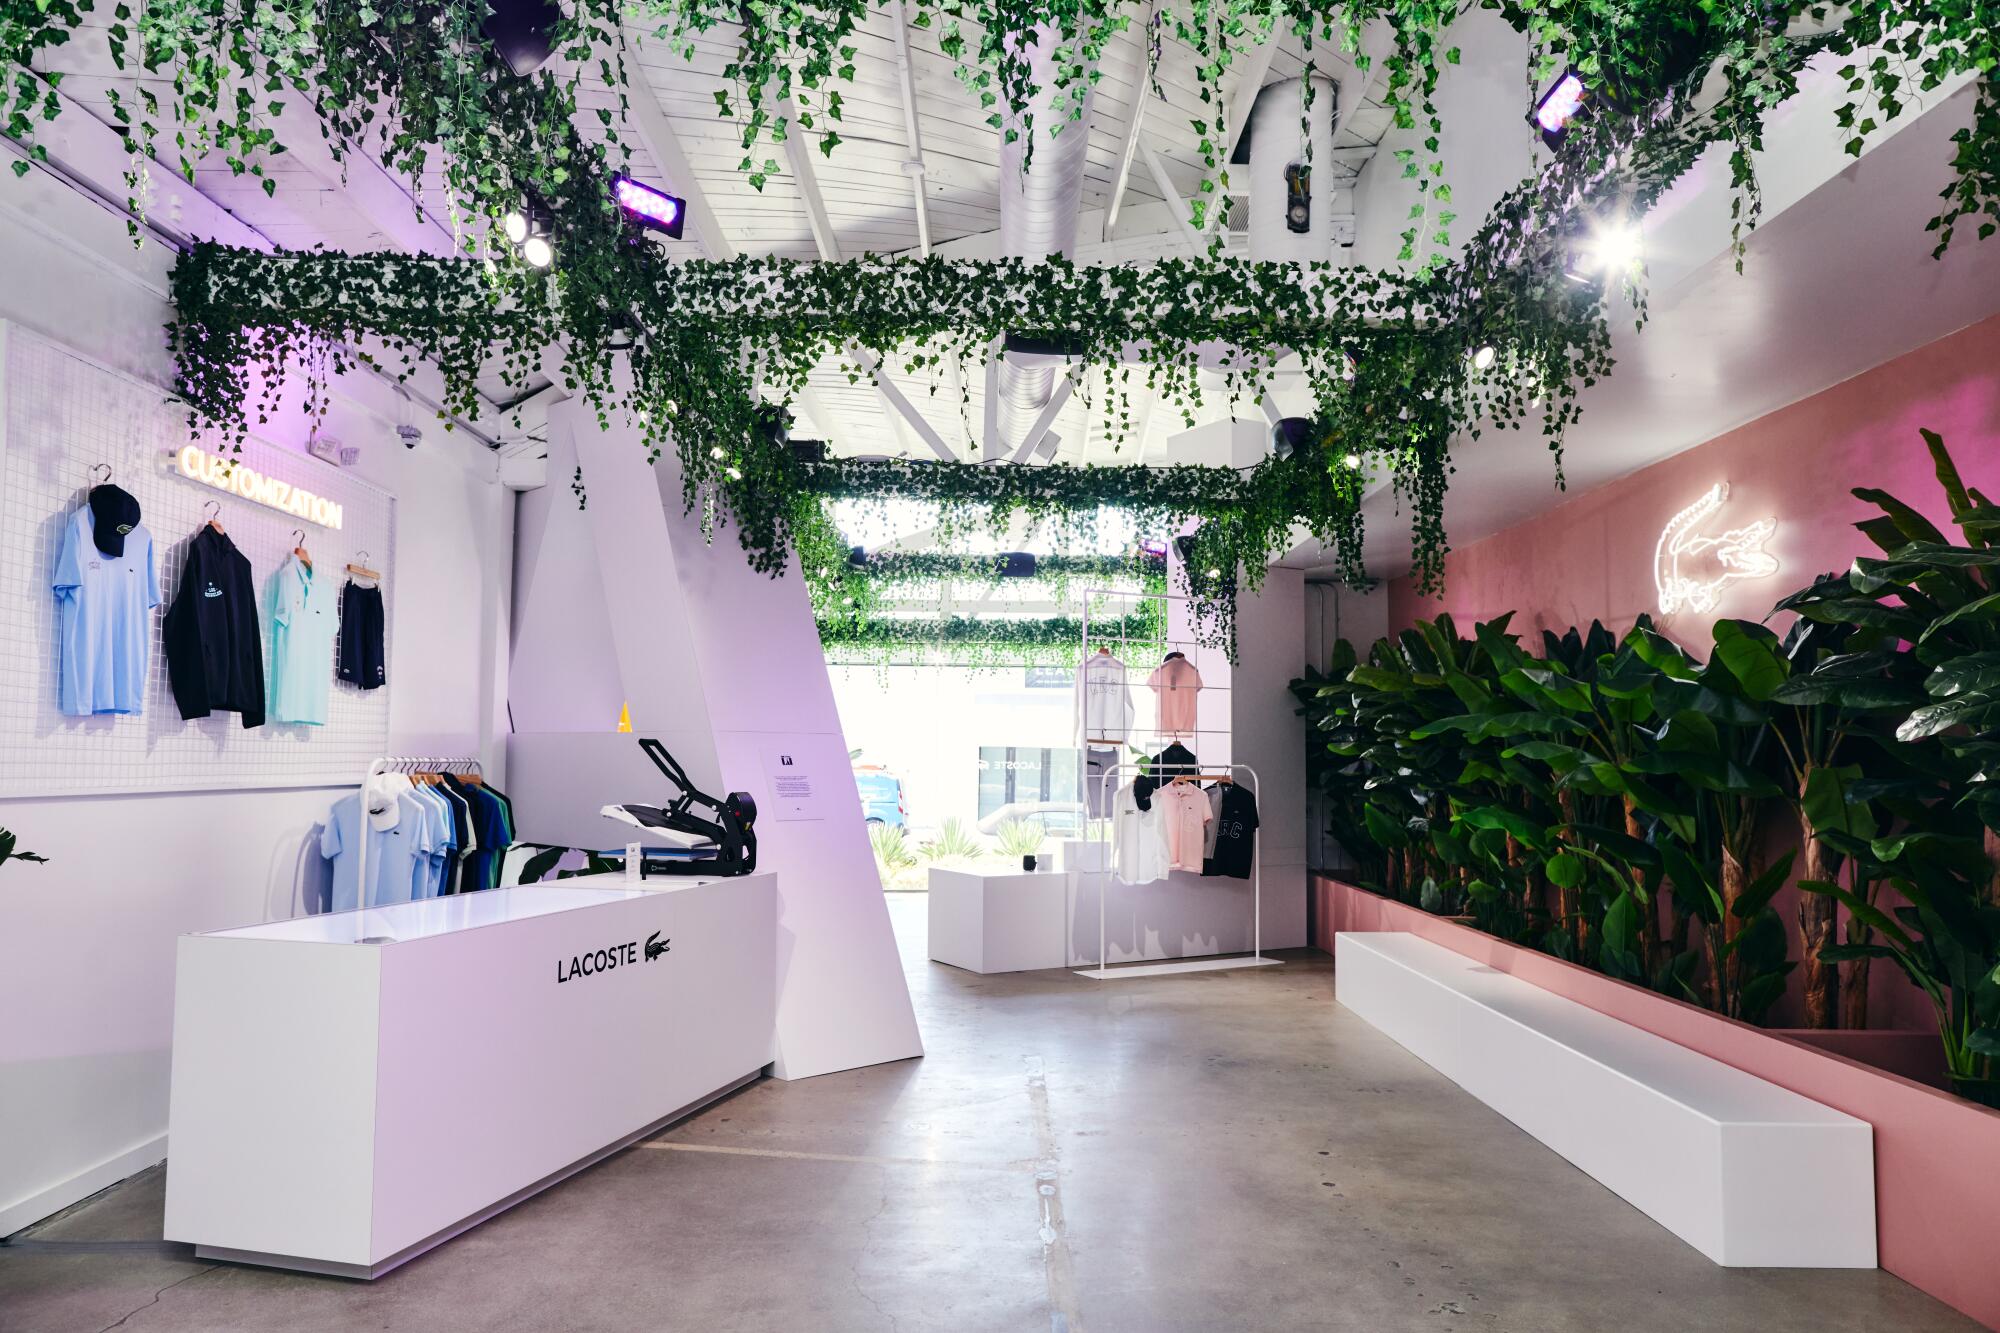 Inside of the Lacoste pop-up shop featuring greenery along the wall and ceiling, a neon alligator sign, and hanging products